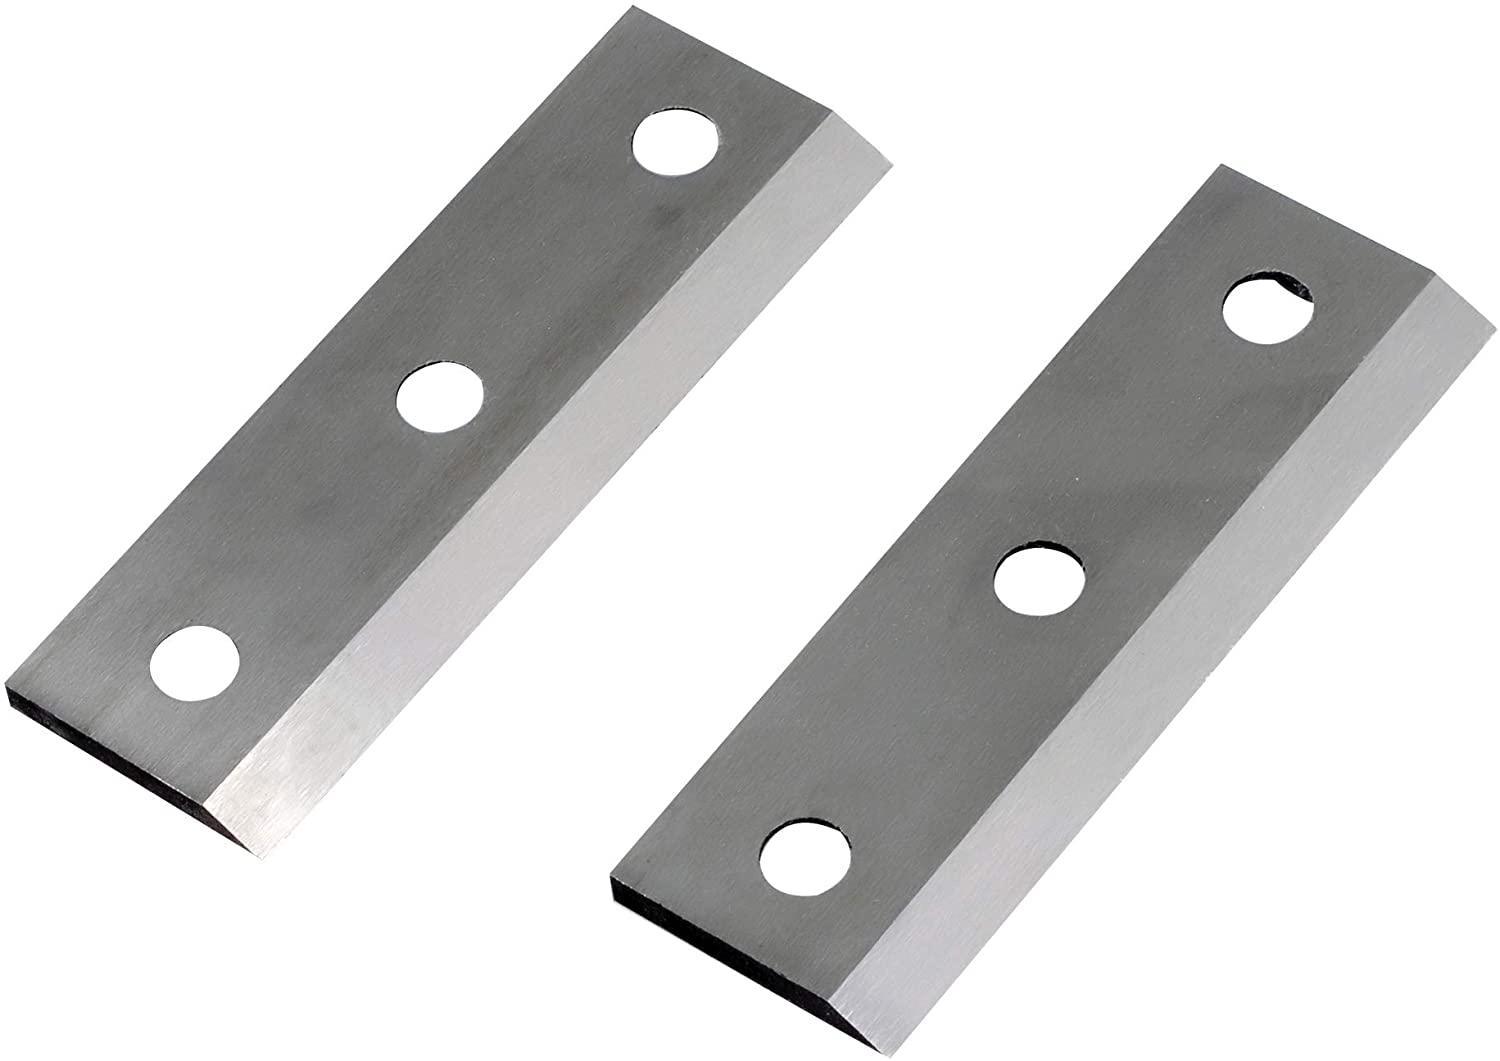 GreatCircleUSA Mini Wood Chipper Replacement Blades - Fits GUO033, GUO035, and GUO054 - DIY Tools by GreatCircleUS